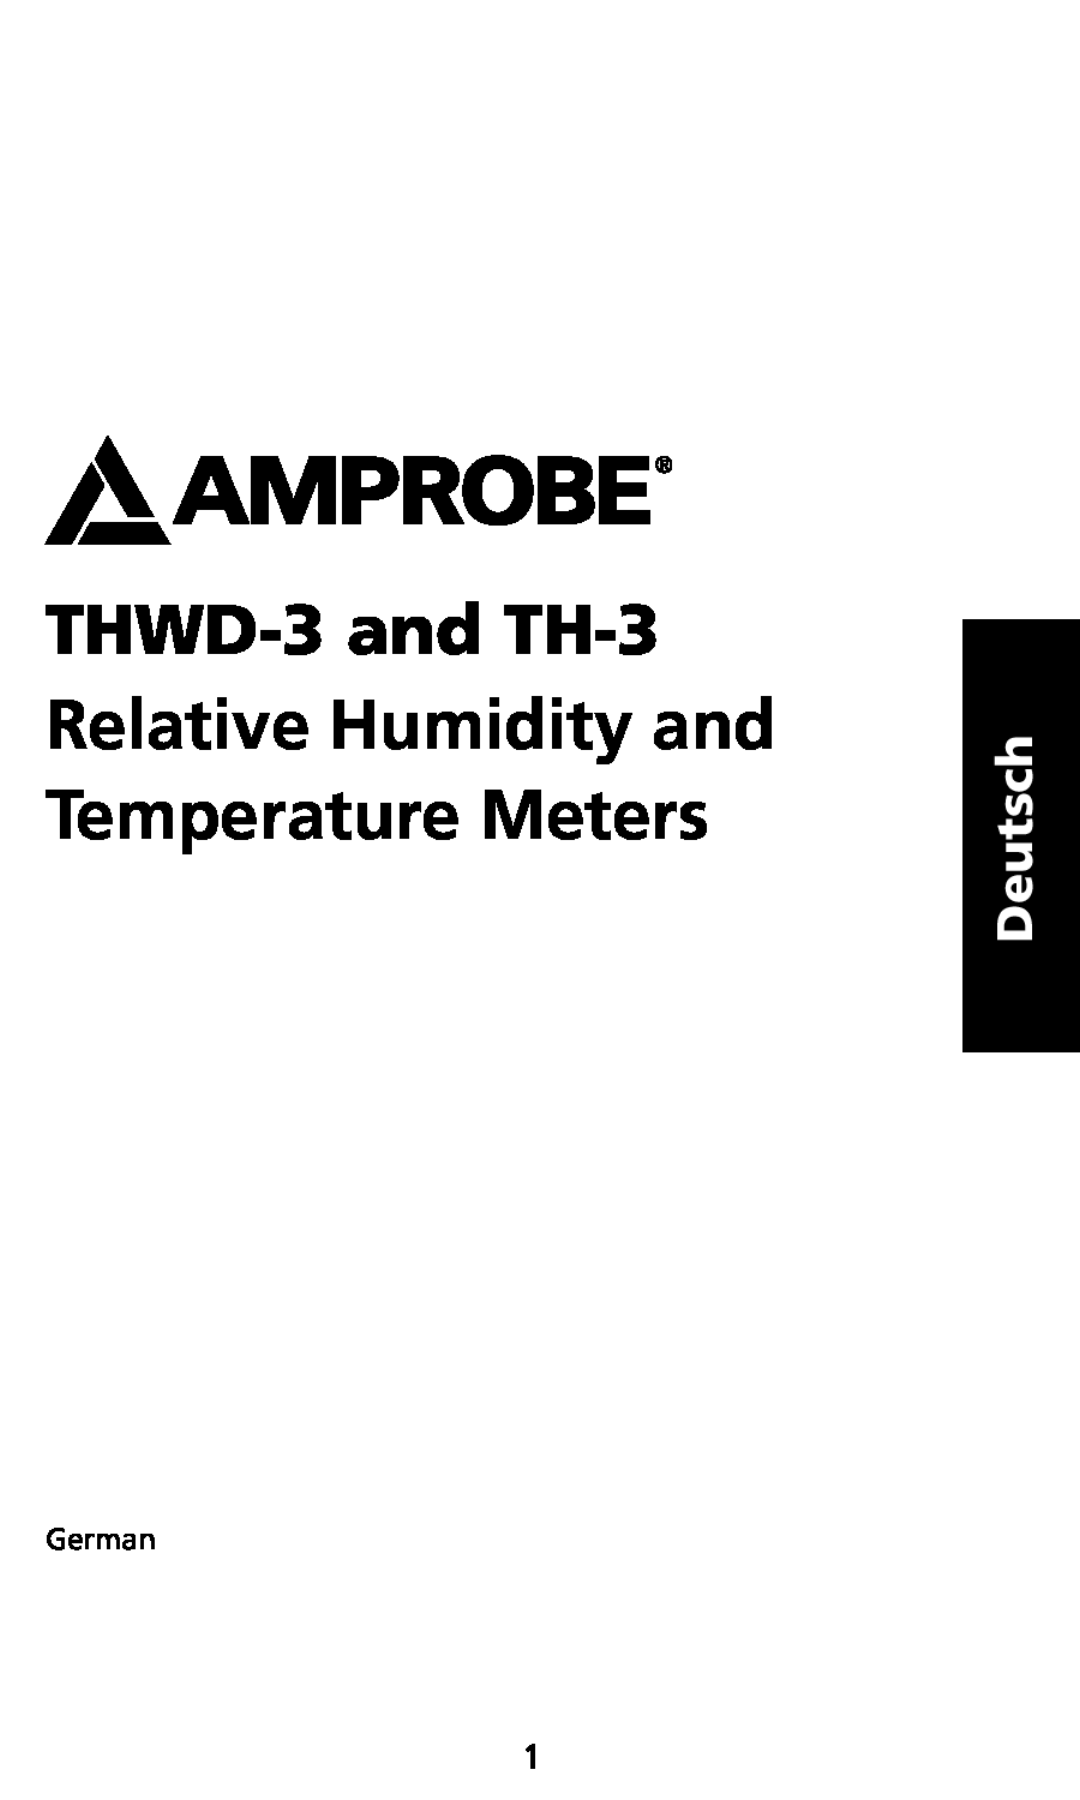 Ampro Corporation user manual Deutsch, THWD-3 and TH-3 Relative Humidity and Temperature Meters, German 